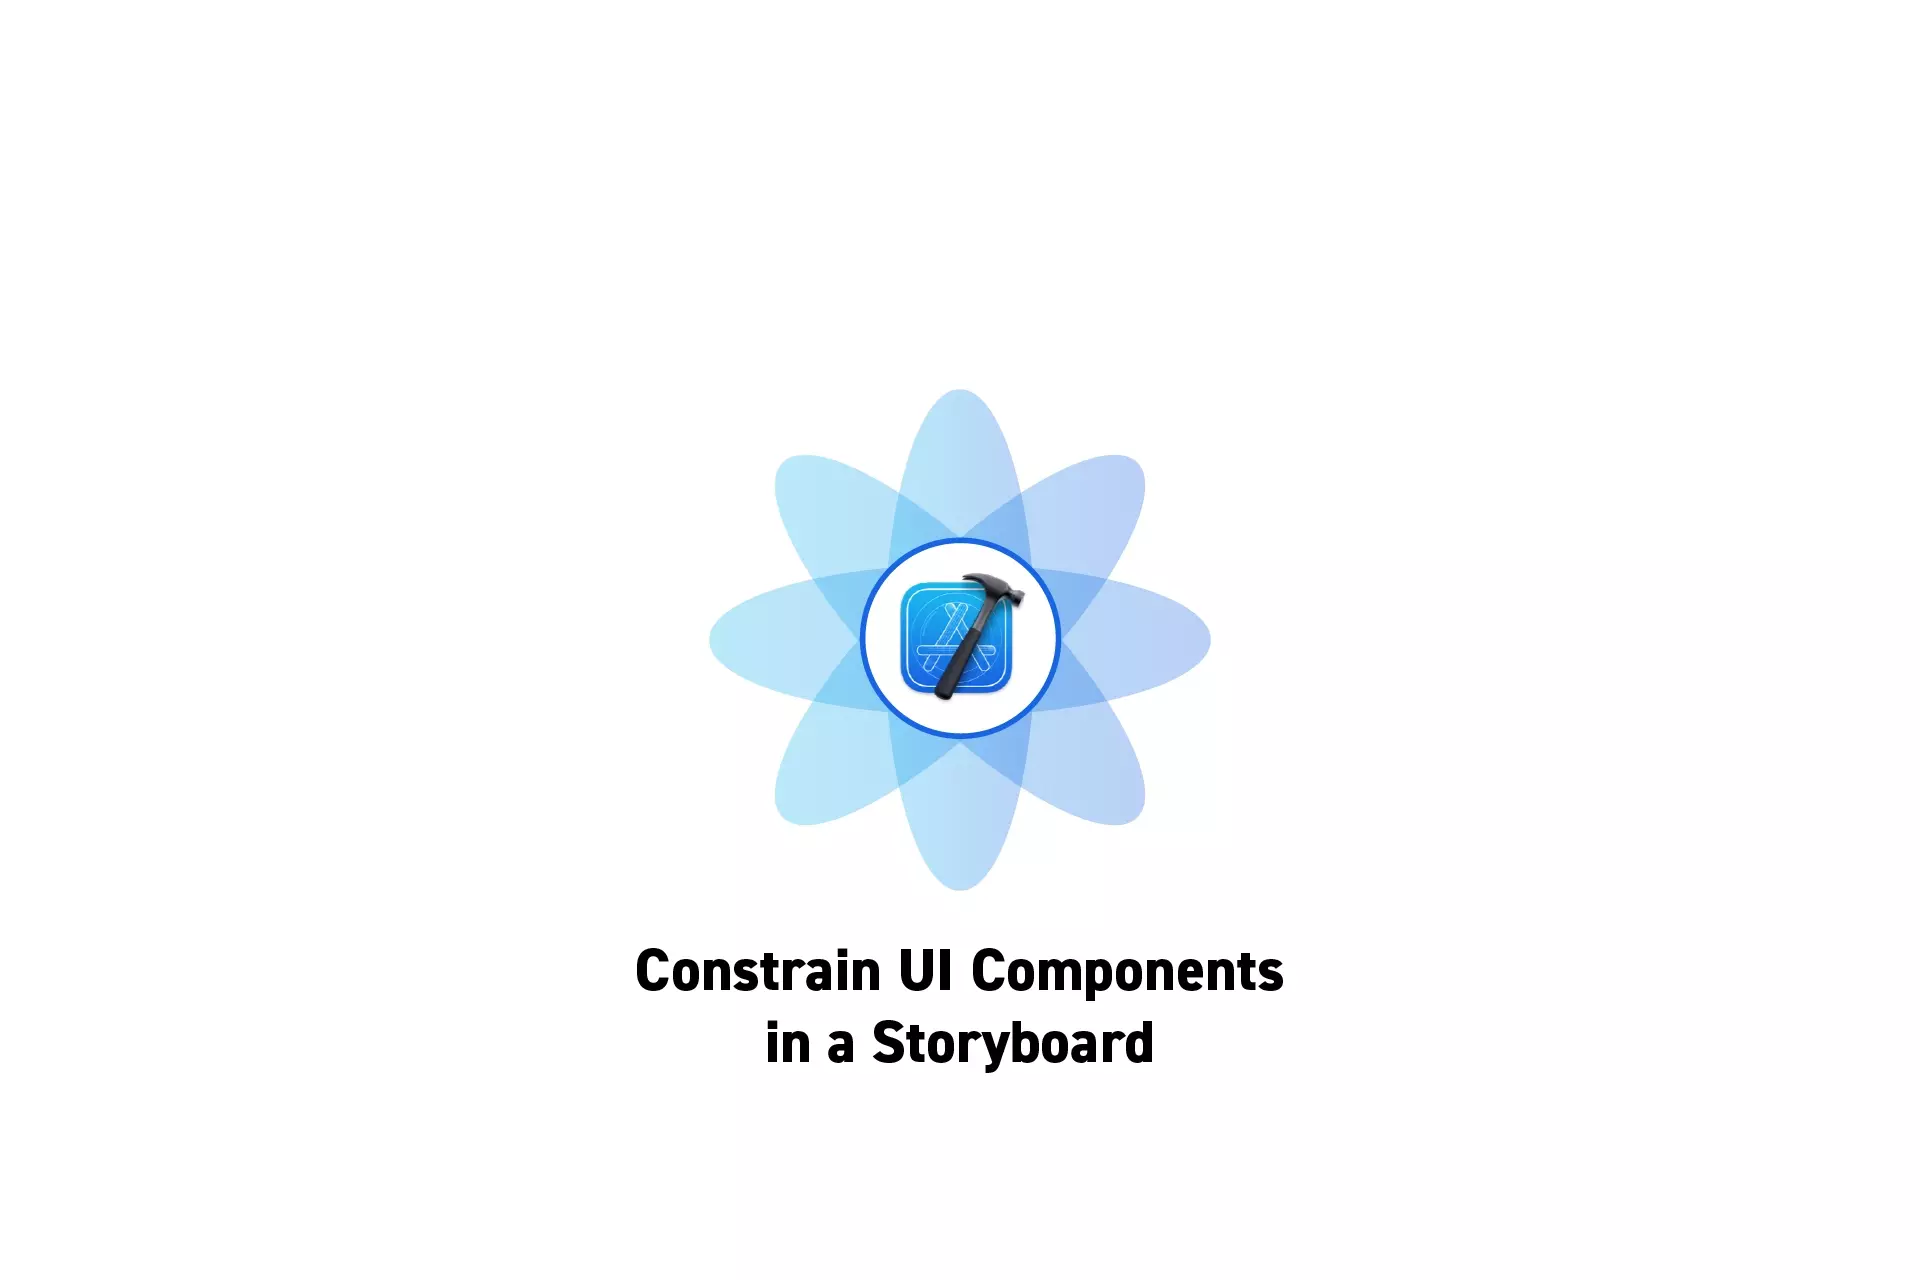 A flower that represents Xcode with the text "Constrain UI Components in a Storyboard" beneath it.